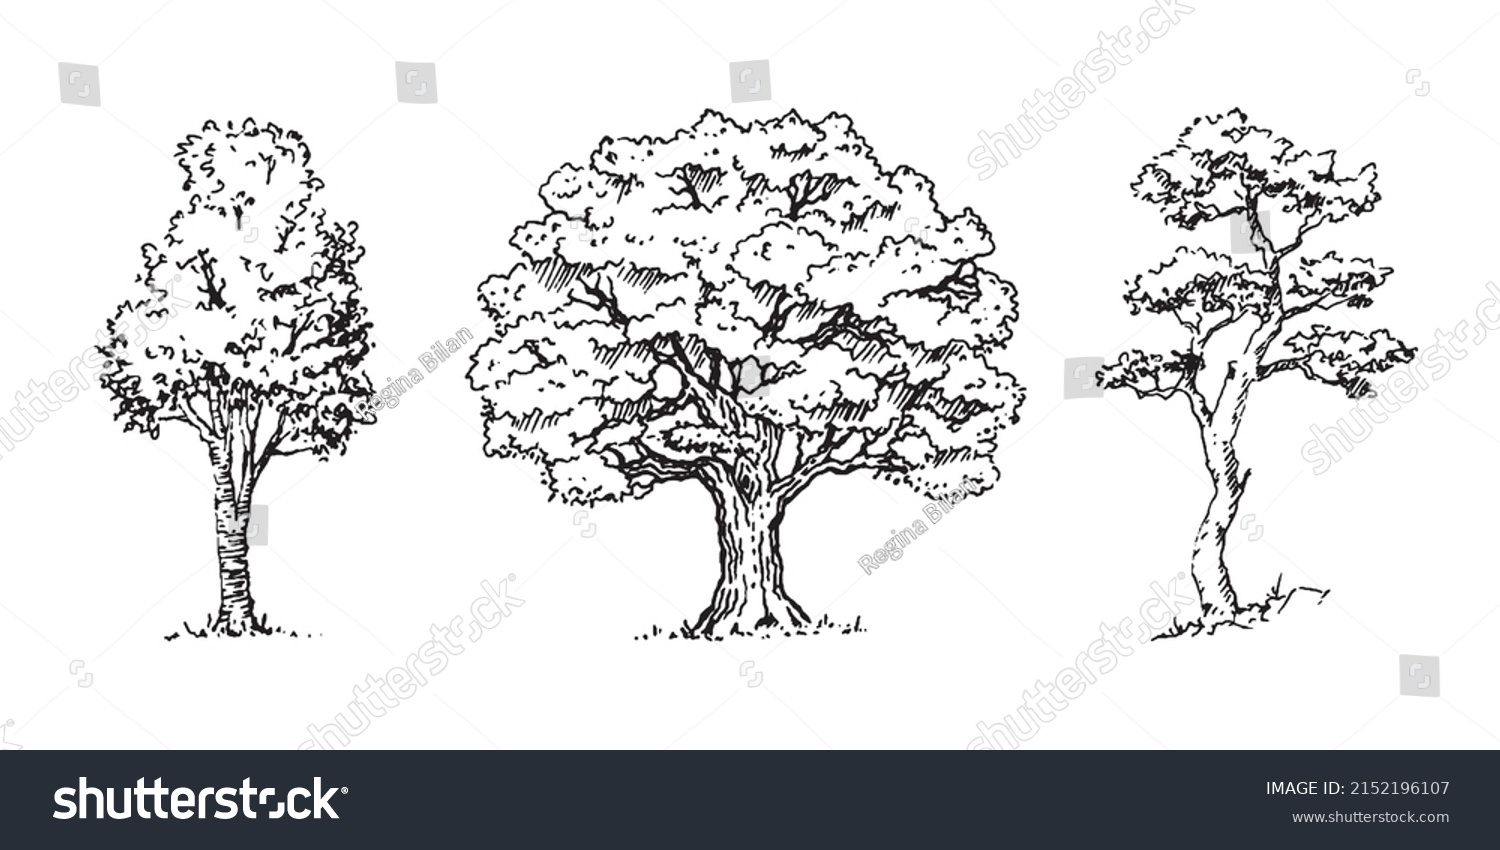 SVG of Set of hand drawn architect tree sketches. Perfect for architectural illustration landscape svg